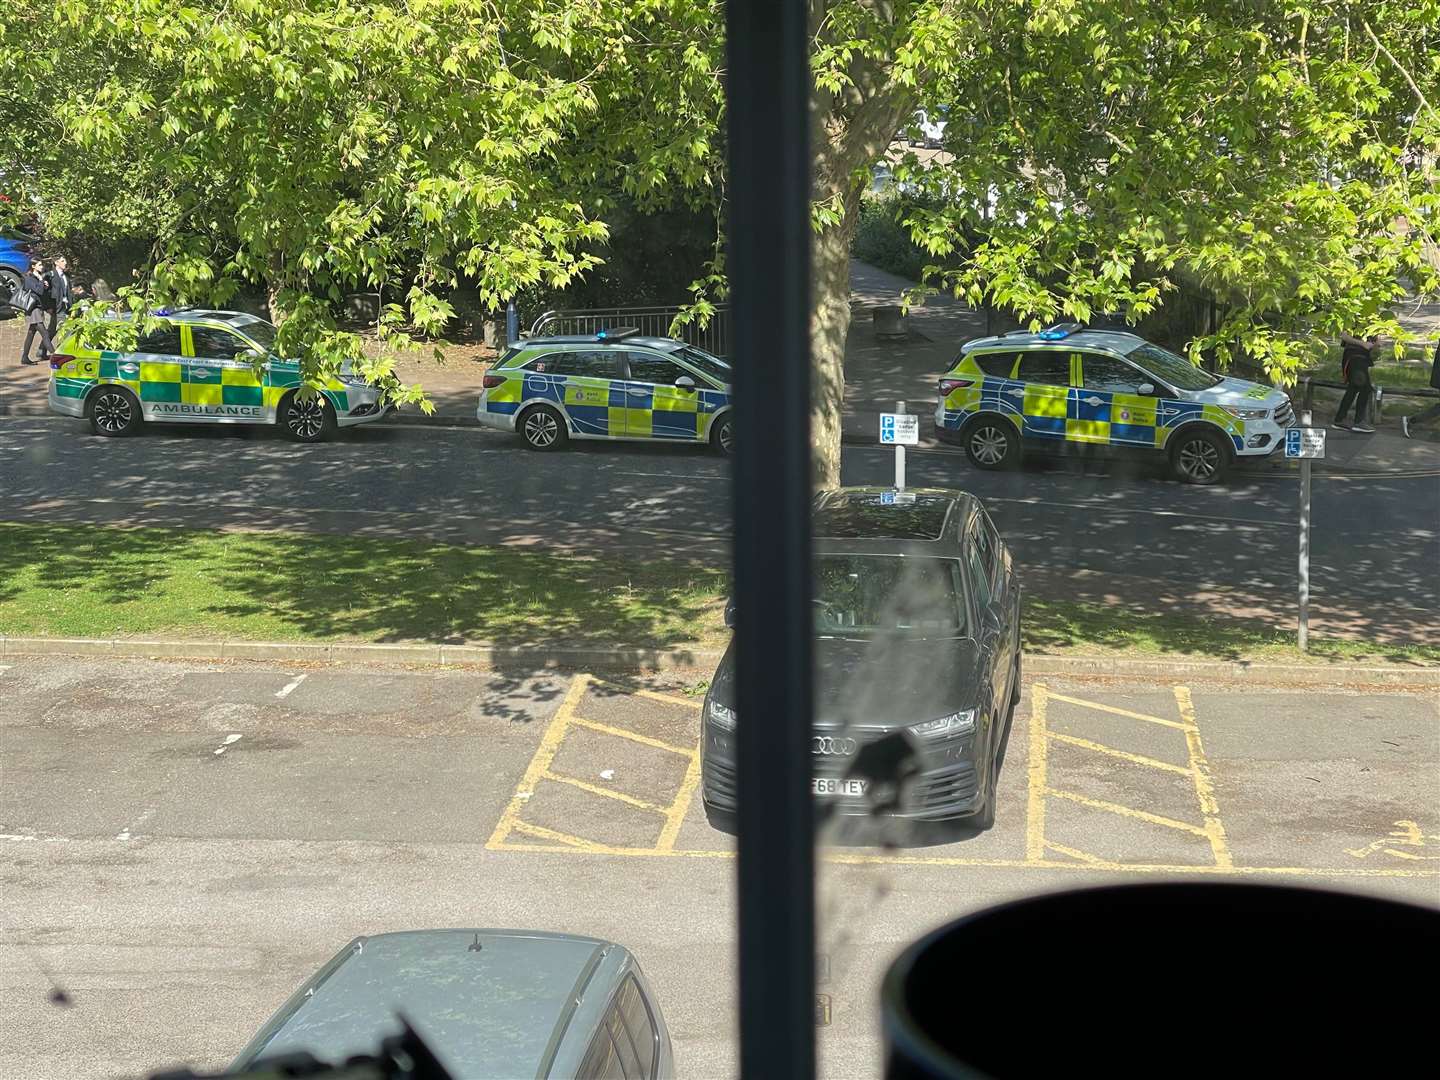 The emergency services were seen outside Lockmeadow in Maidstone today due to a medical incident